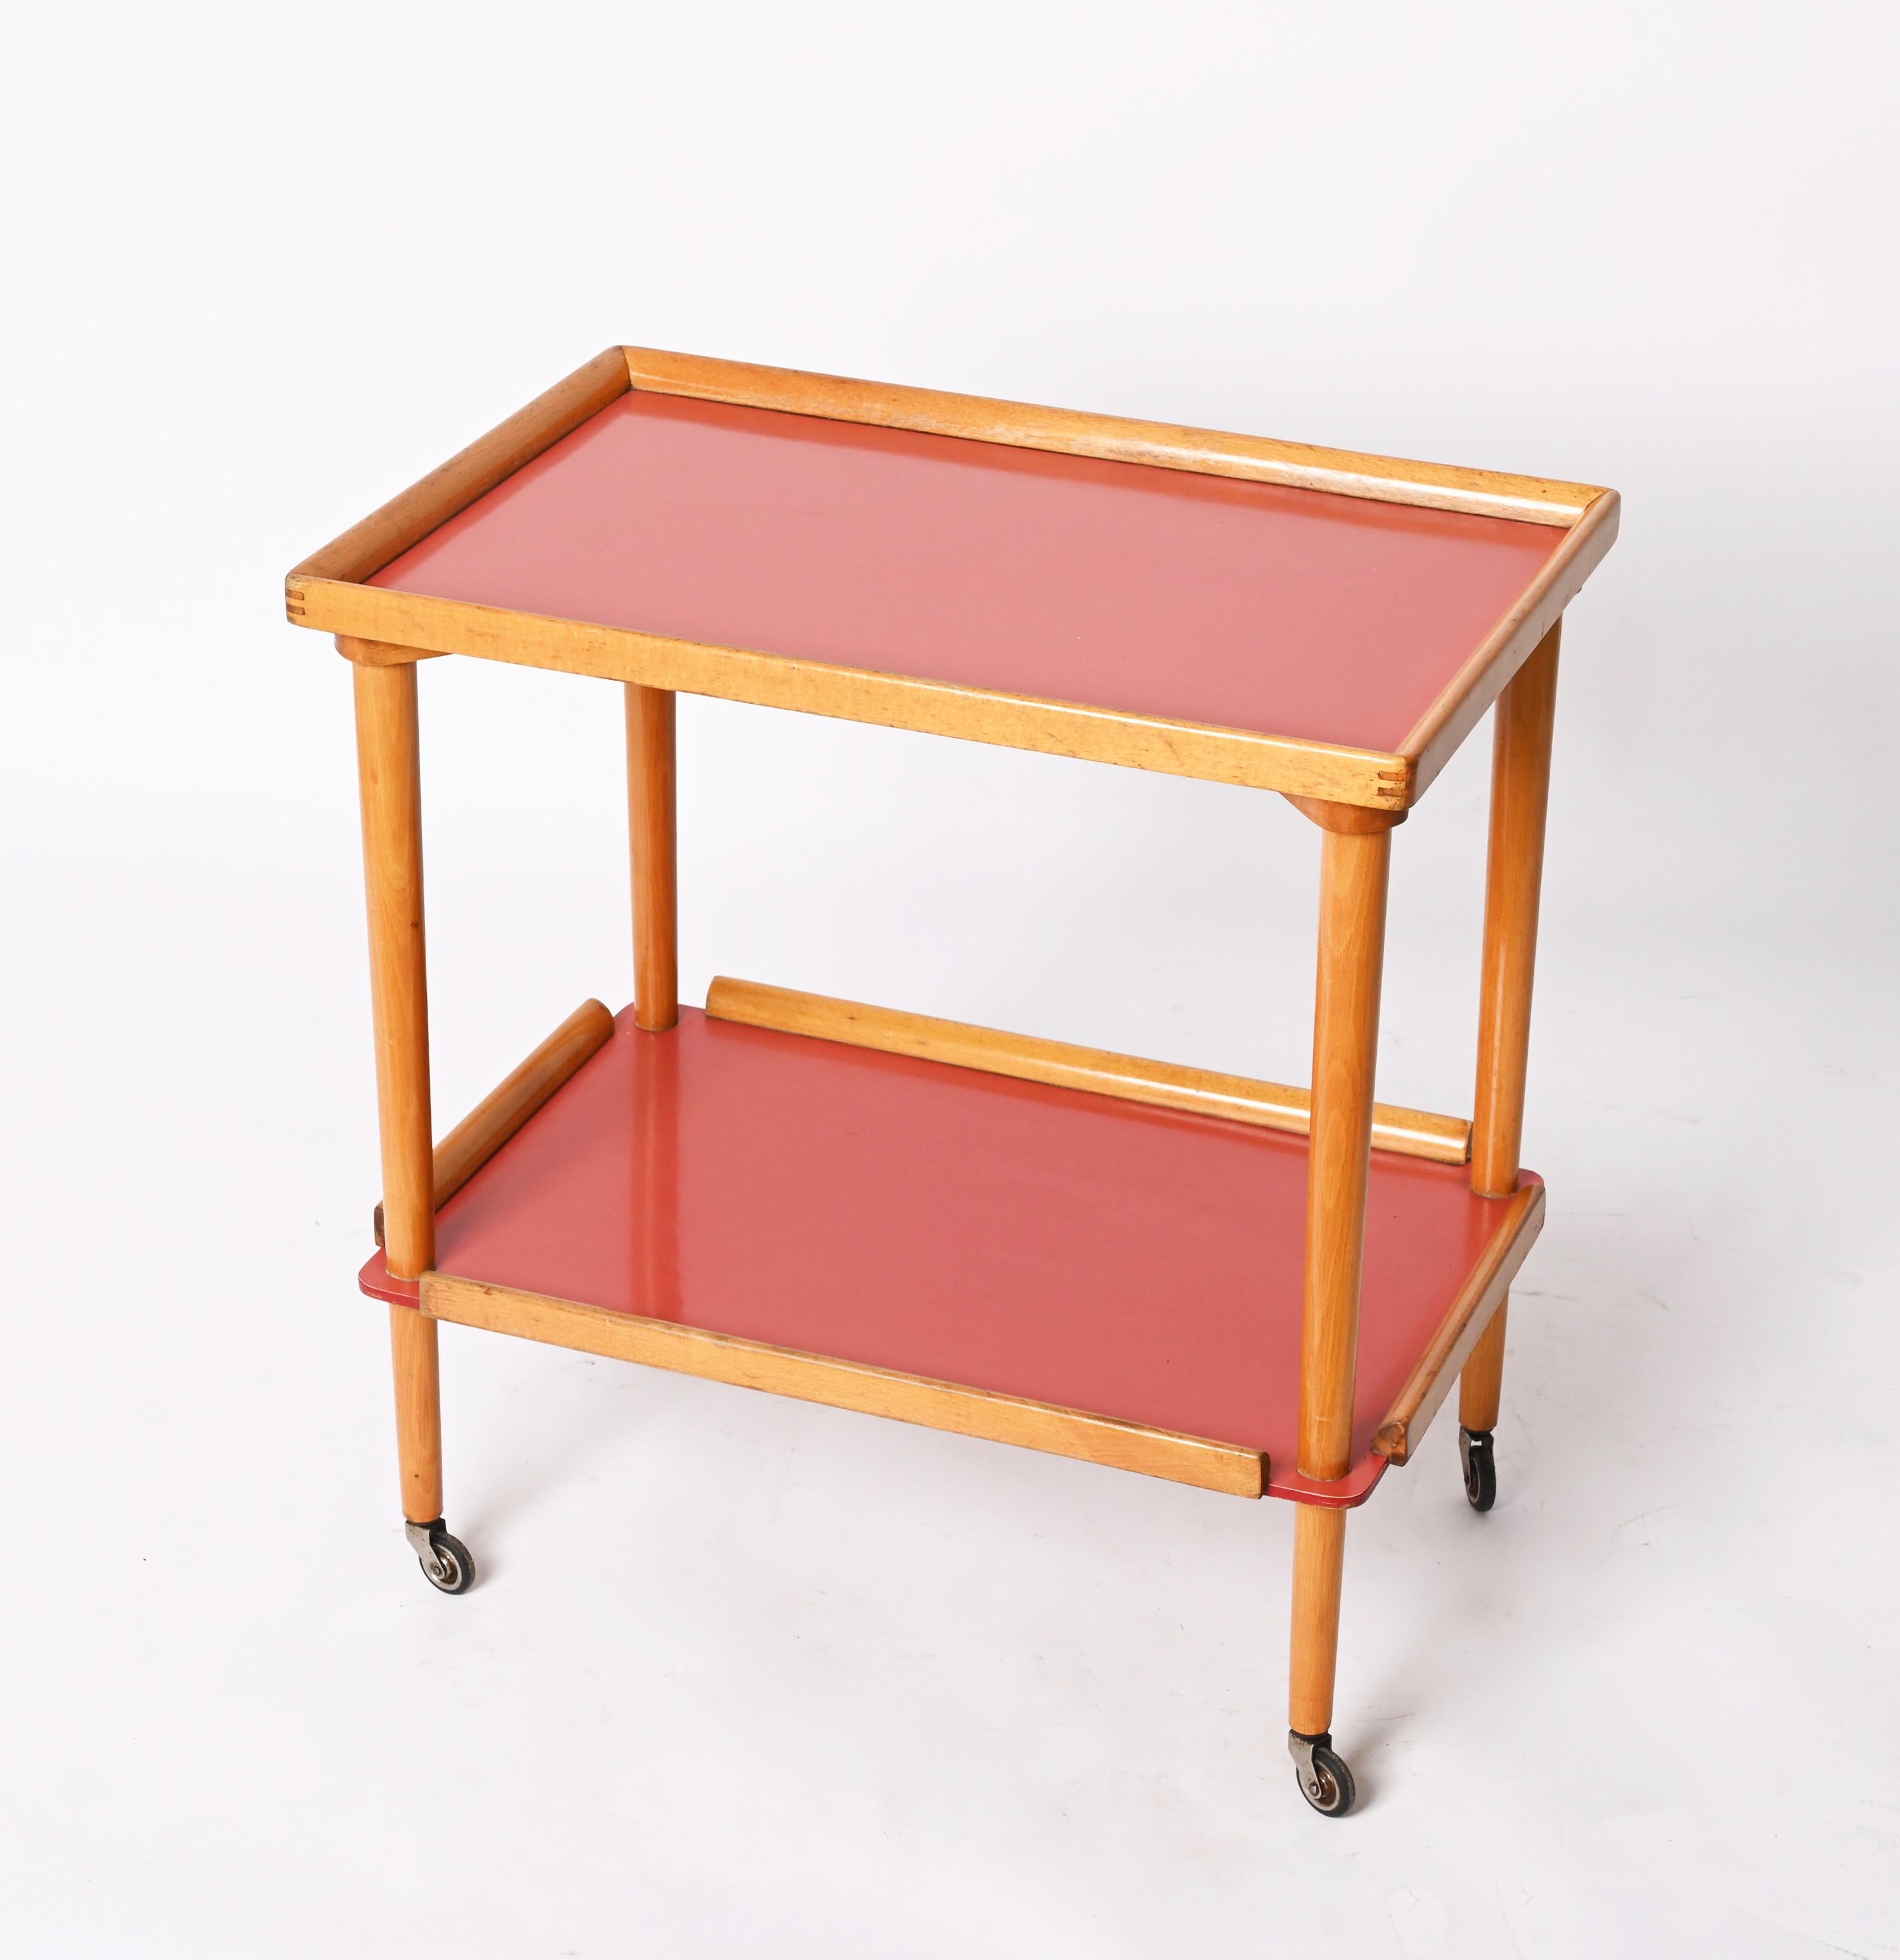 Midcentury Italian Beech Wood and Formica Red Two Tiered Bar Cart, 1960s For Sale 4